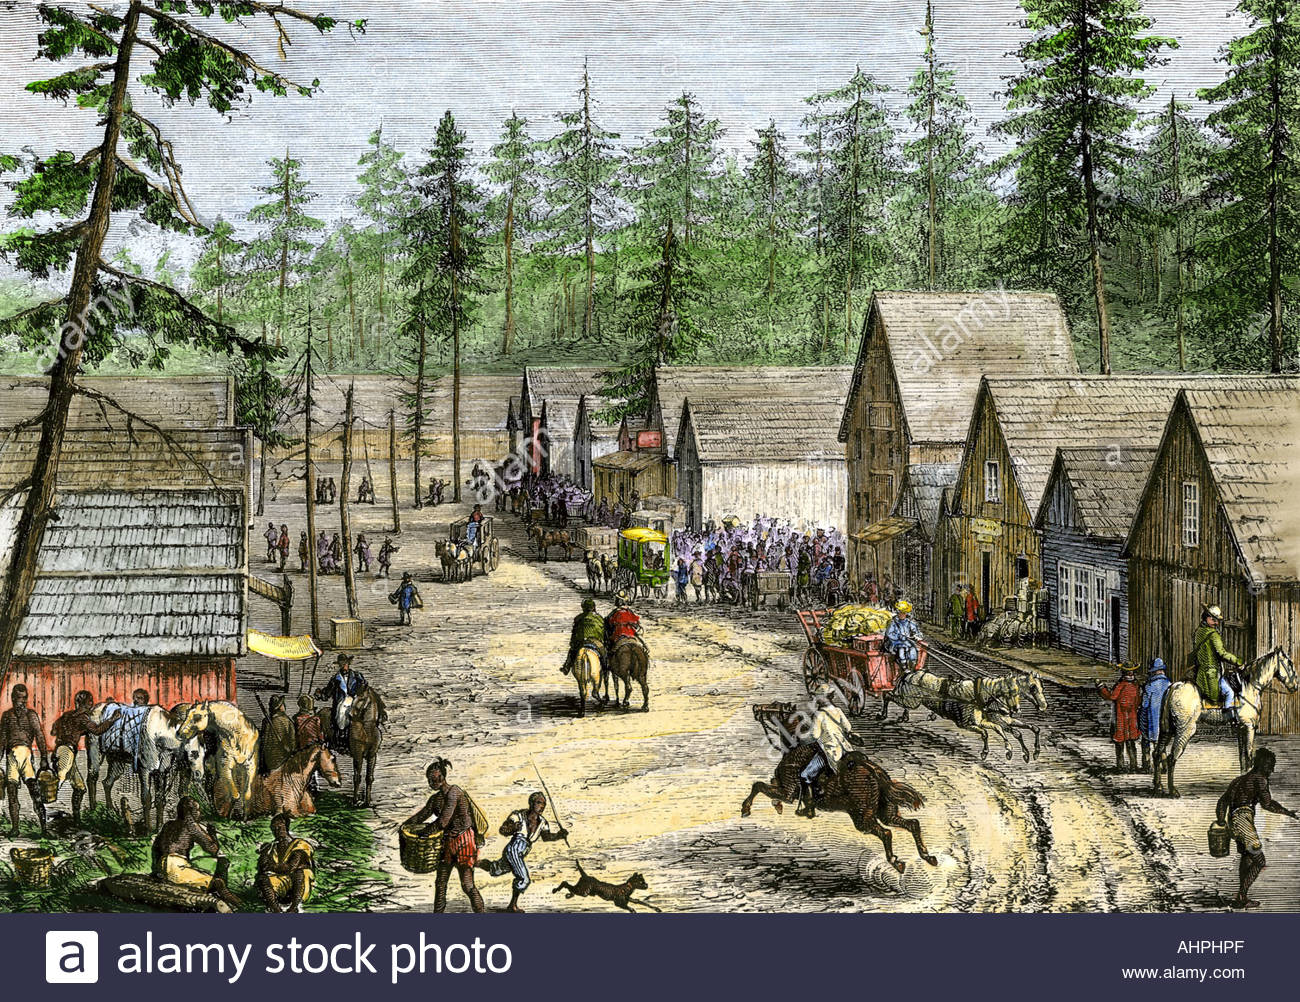 new-settlers-in-a-frontier-town-in-the-pacific-northwest-1800s-AHPHPF.jpg